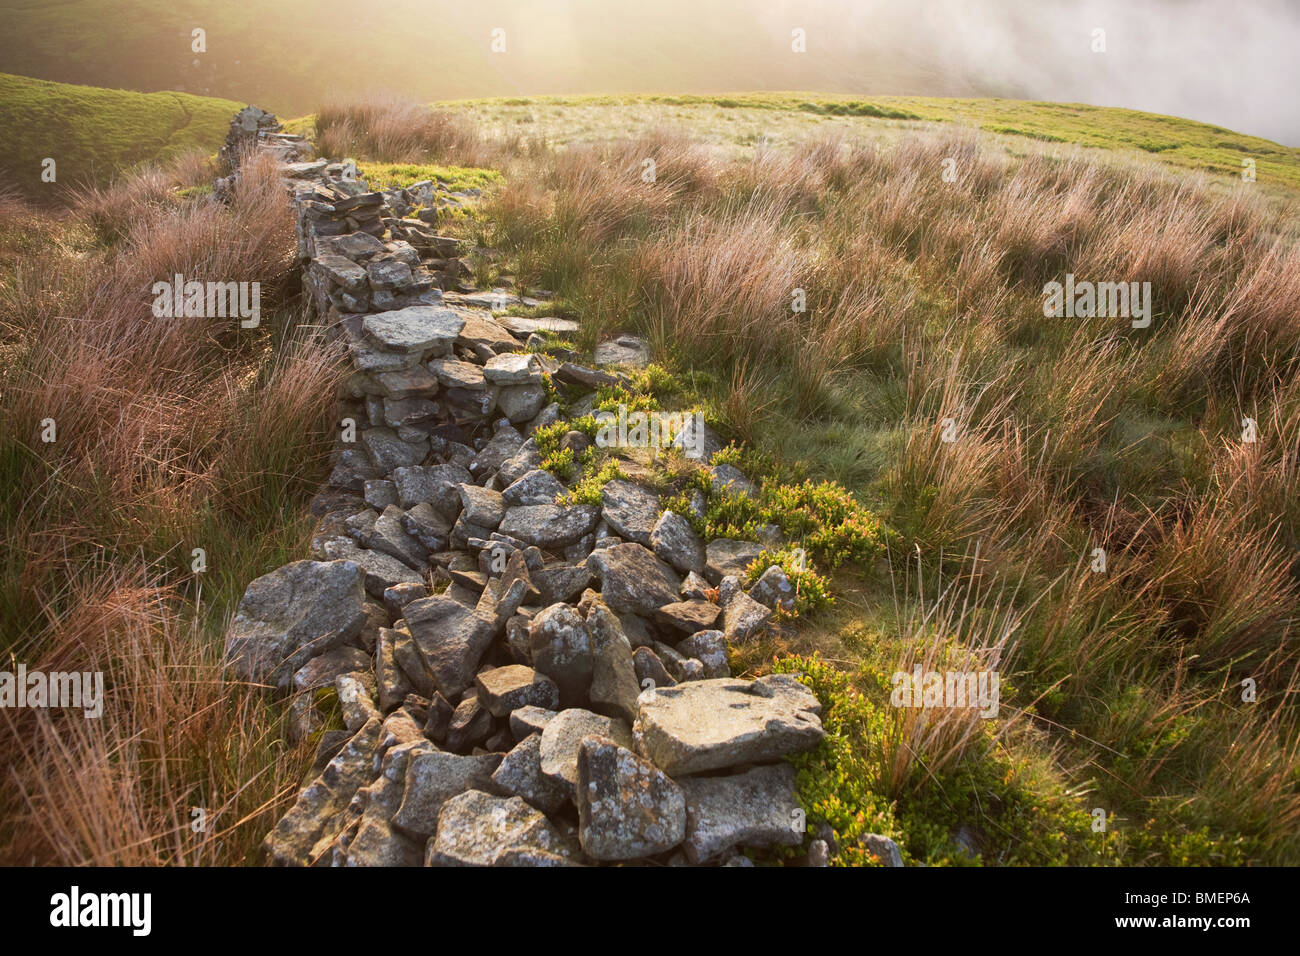 Collapsed dry stone wall on an early morning misty Nether Moor. Stock Photo